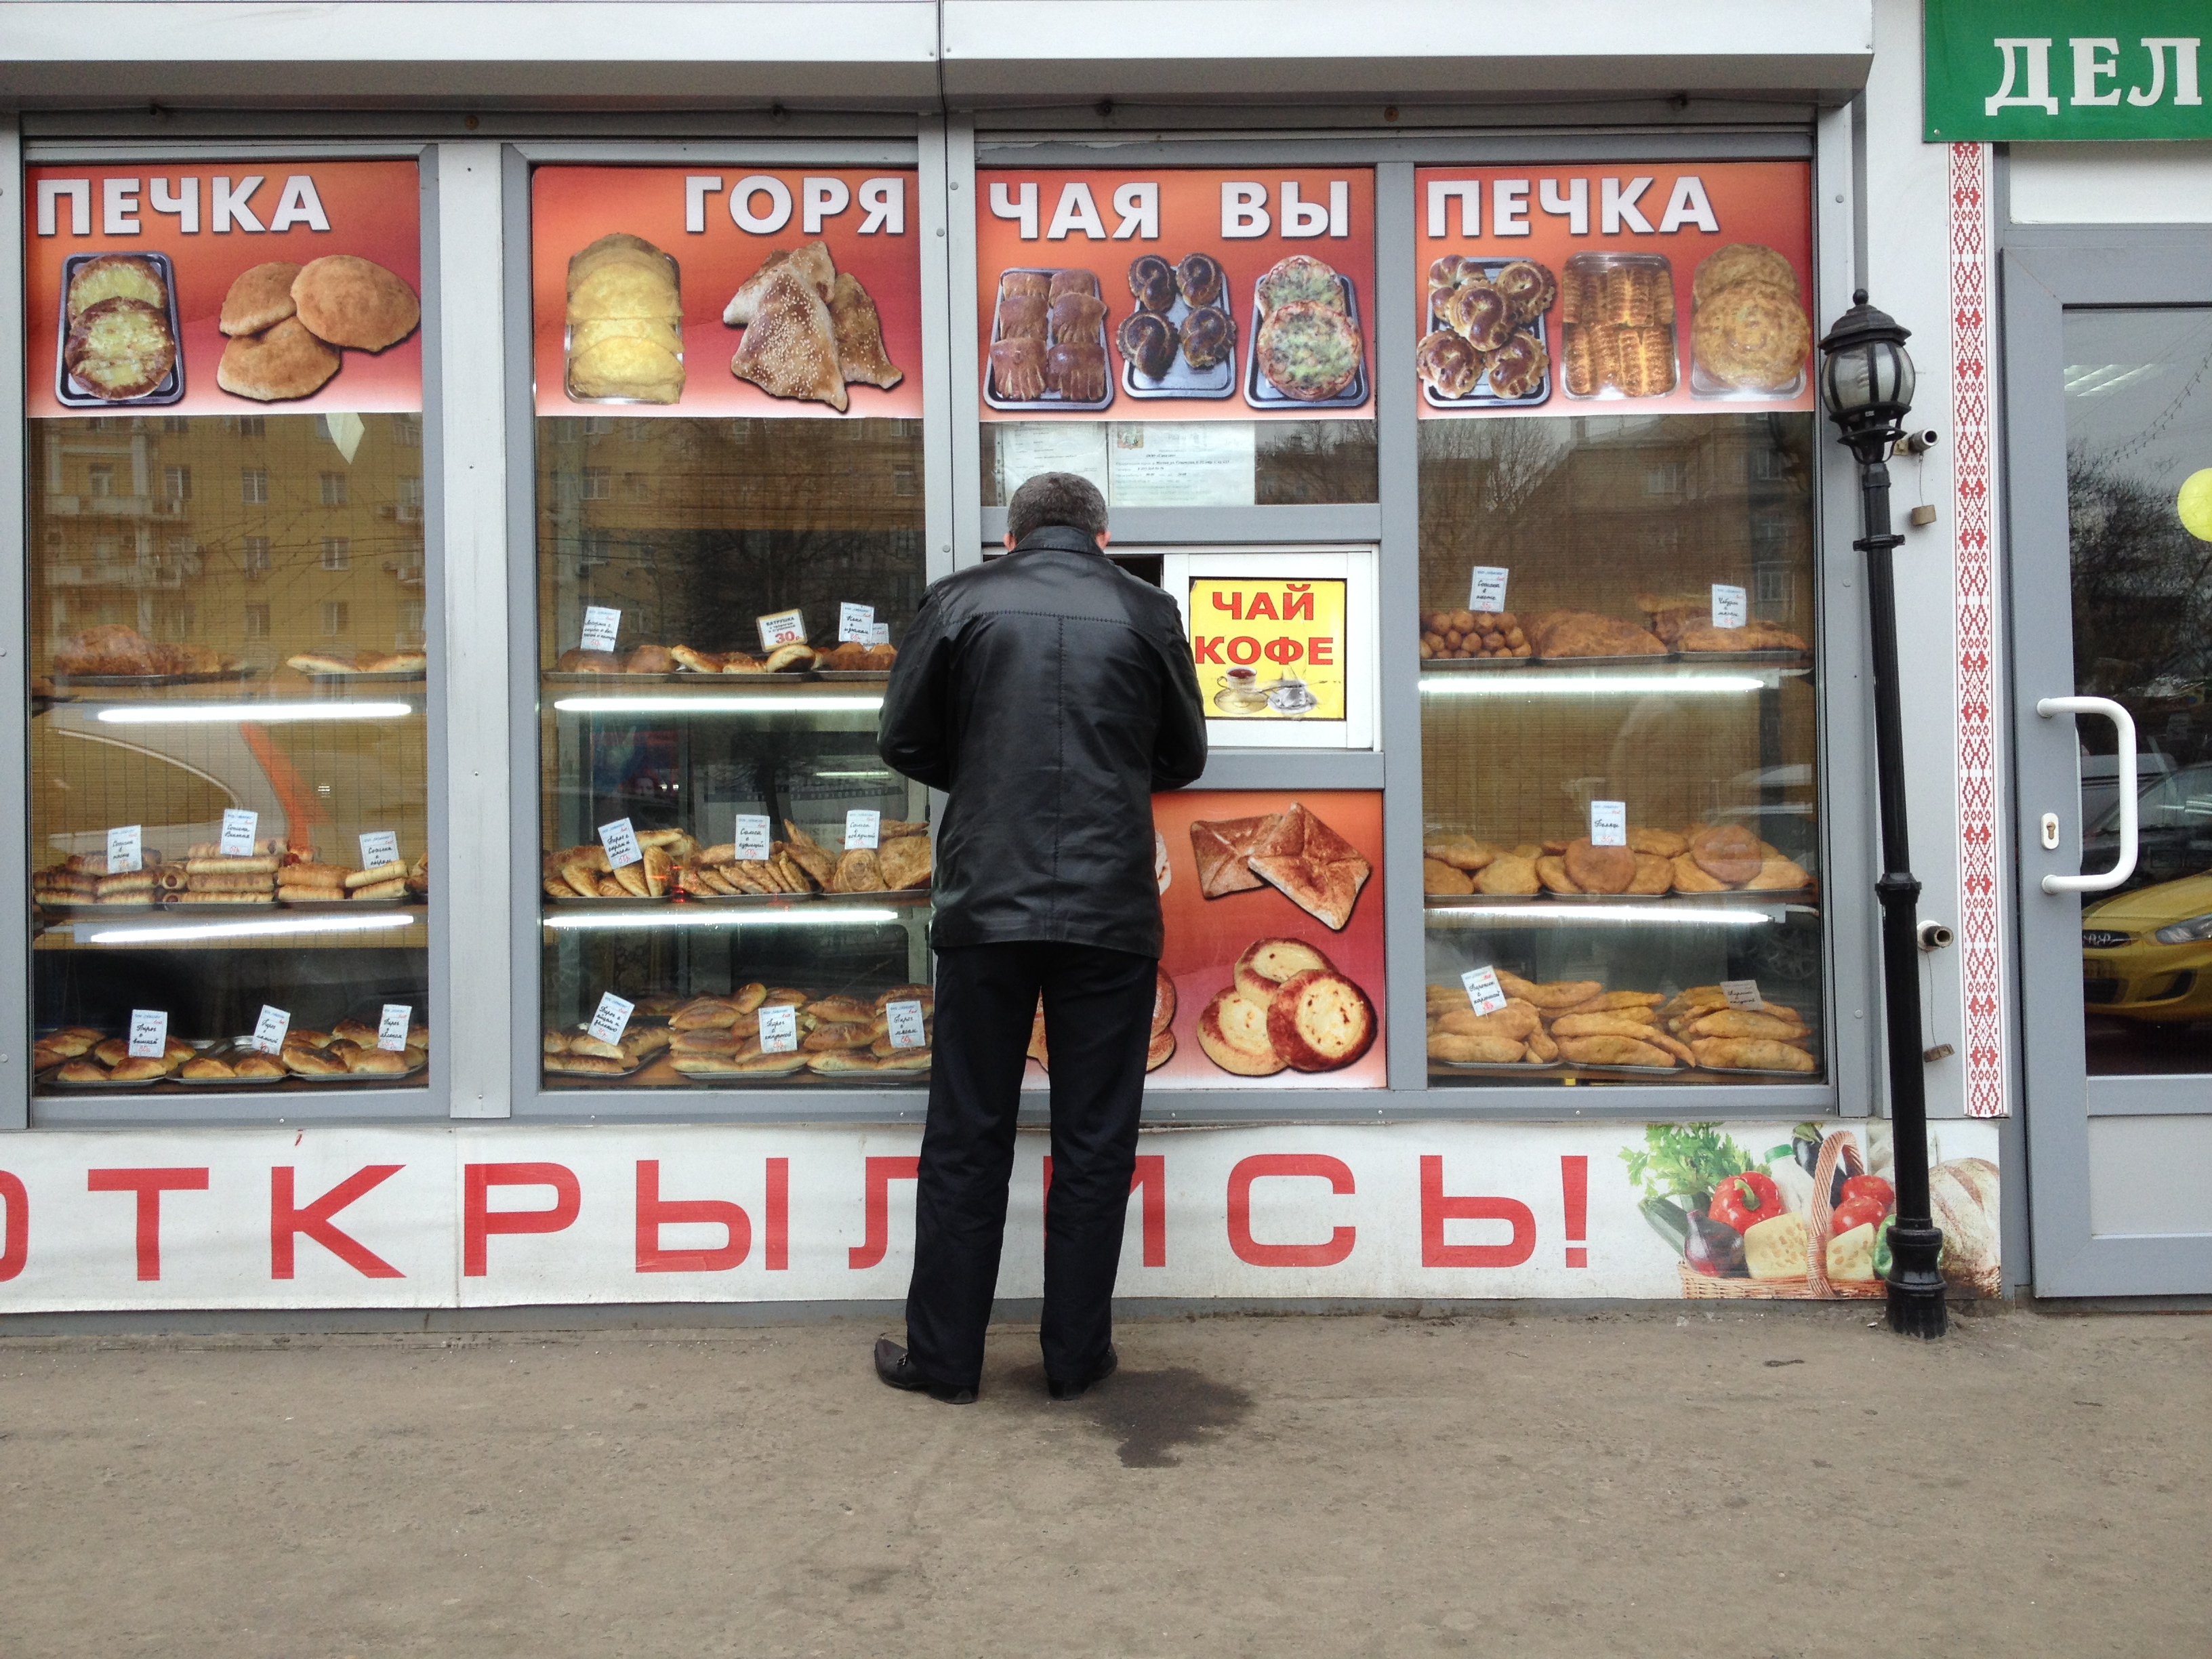 A man outside a bakery om Moscow, 2014.